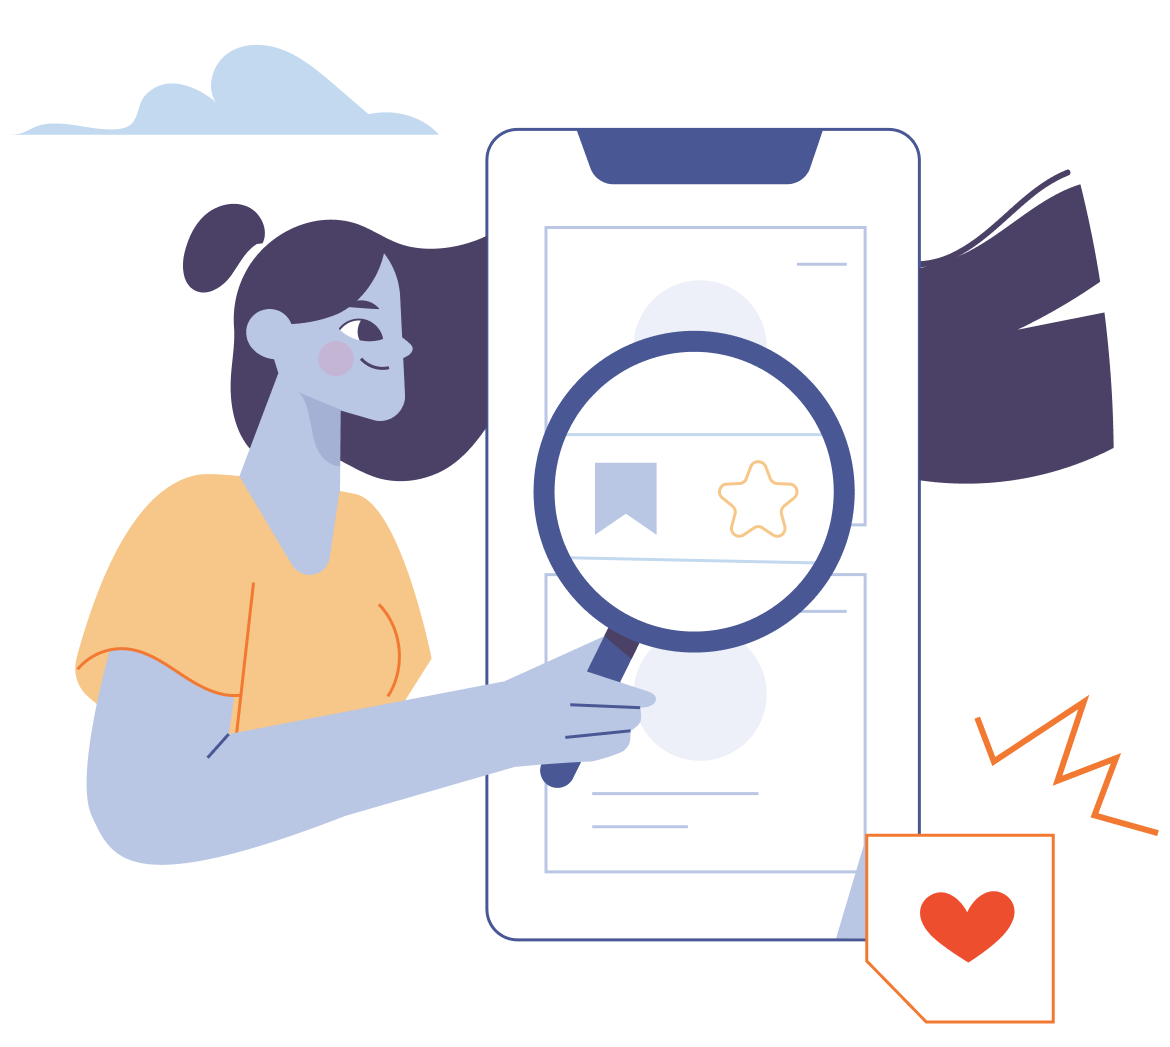 Abstract illustration of woman inspecting phone UI with magnifying glass